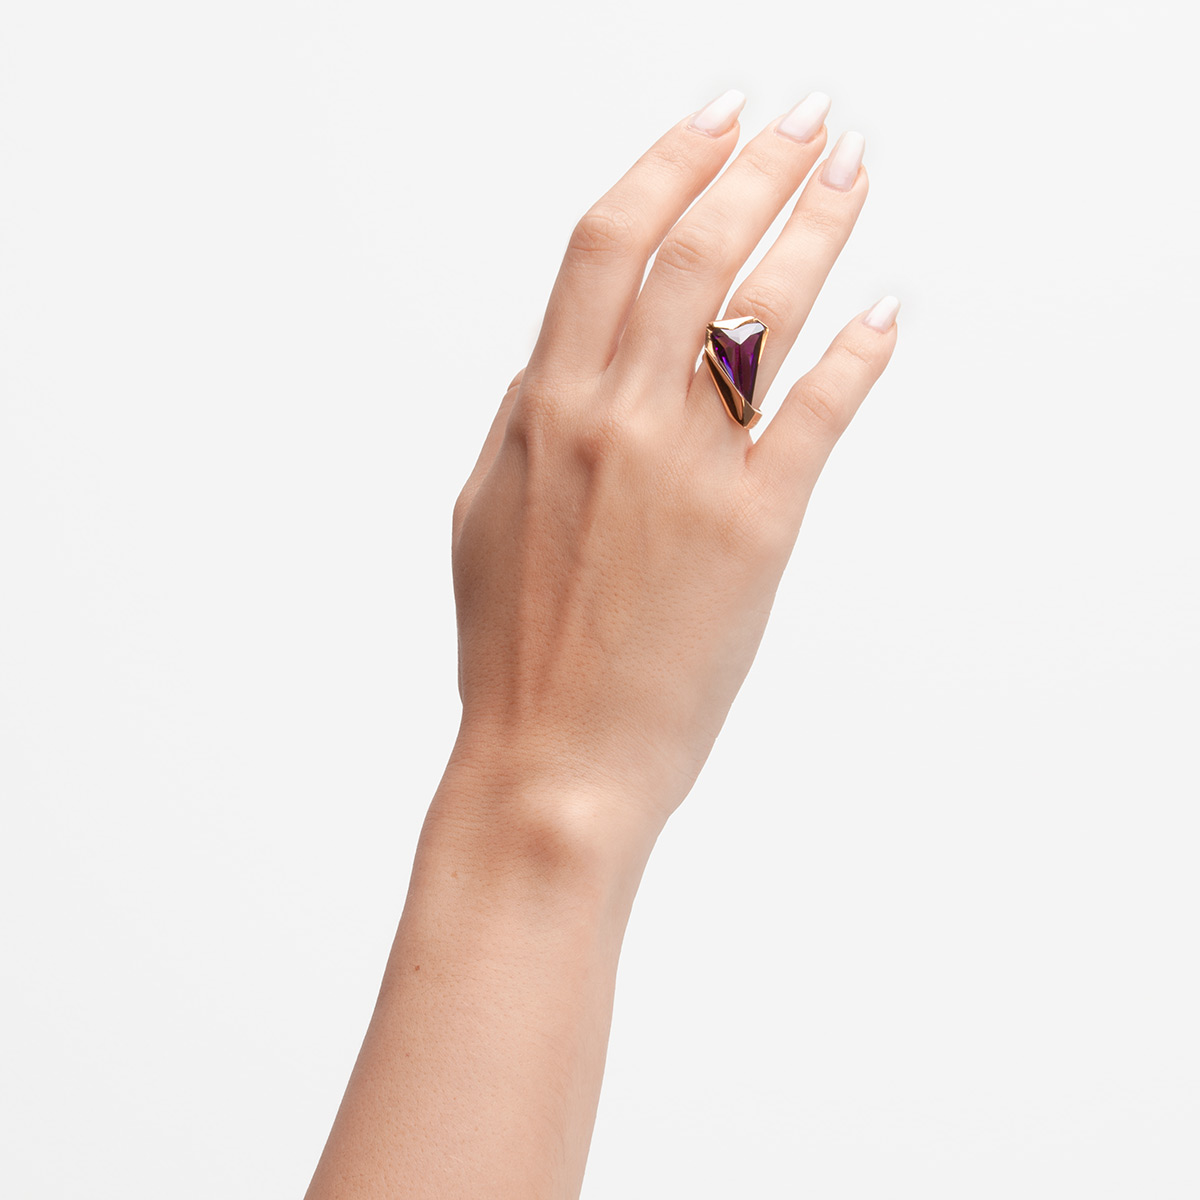 Kua handmade ring in 9k or 18k gold and violet hydrothermal quartz on the arm designed by Belen Bajo